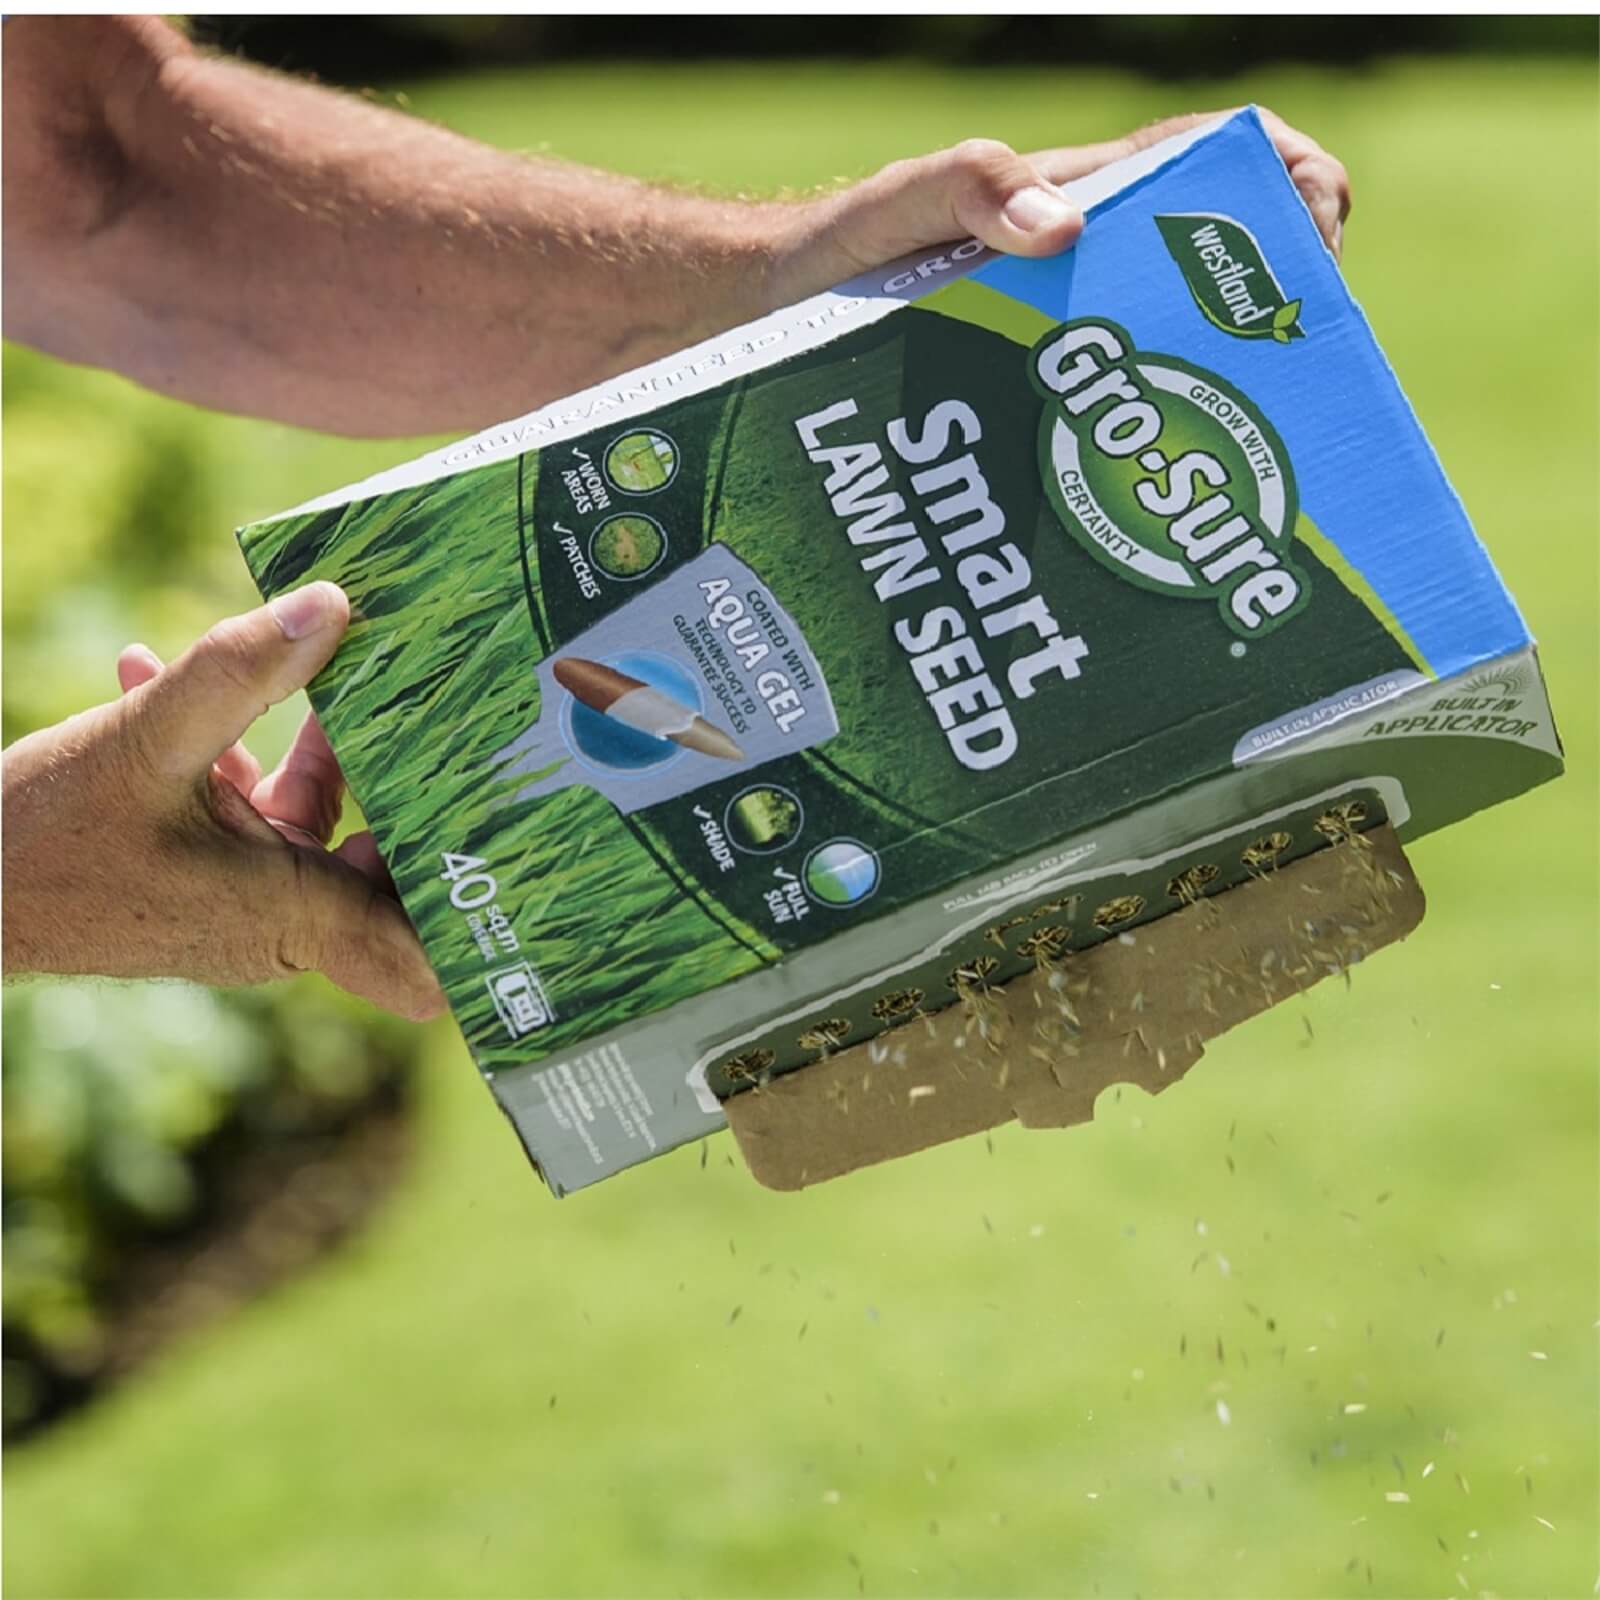 Gro-Sure Smart Lawn Seed - 25m²